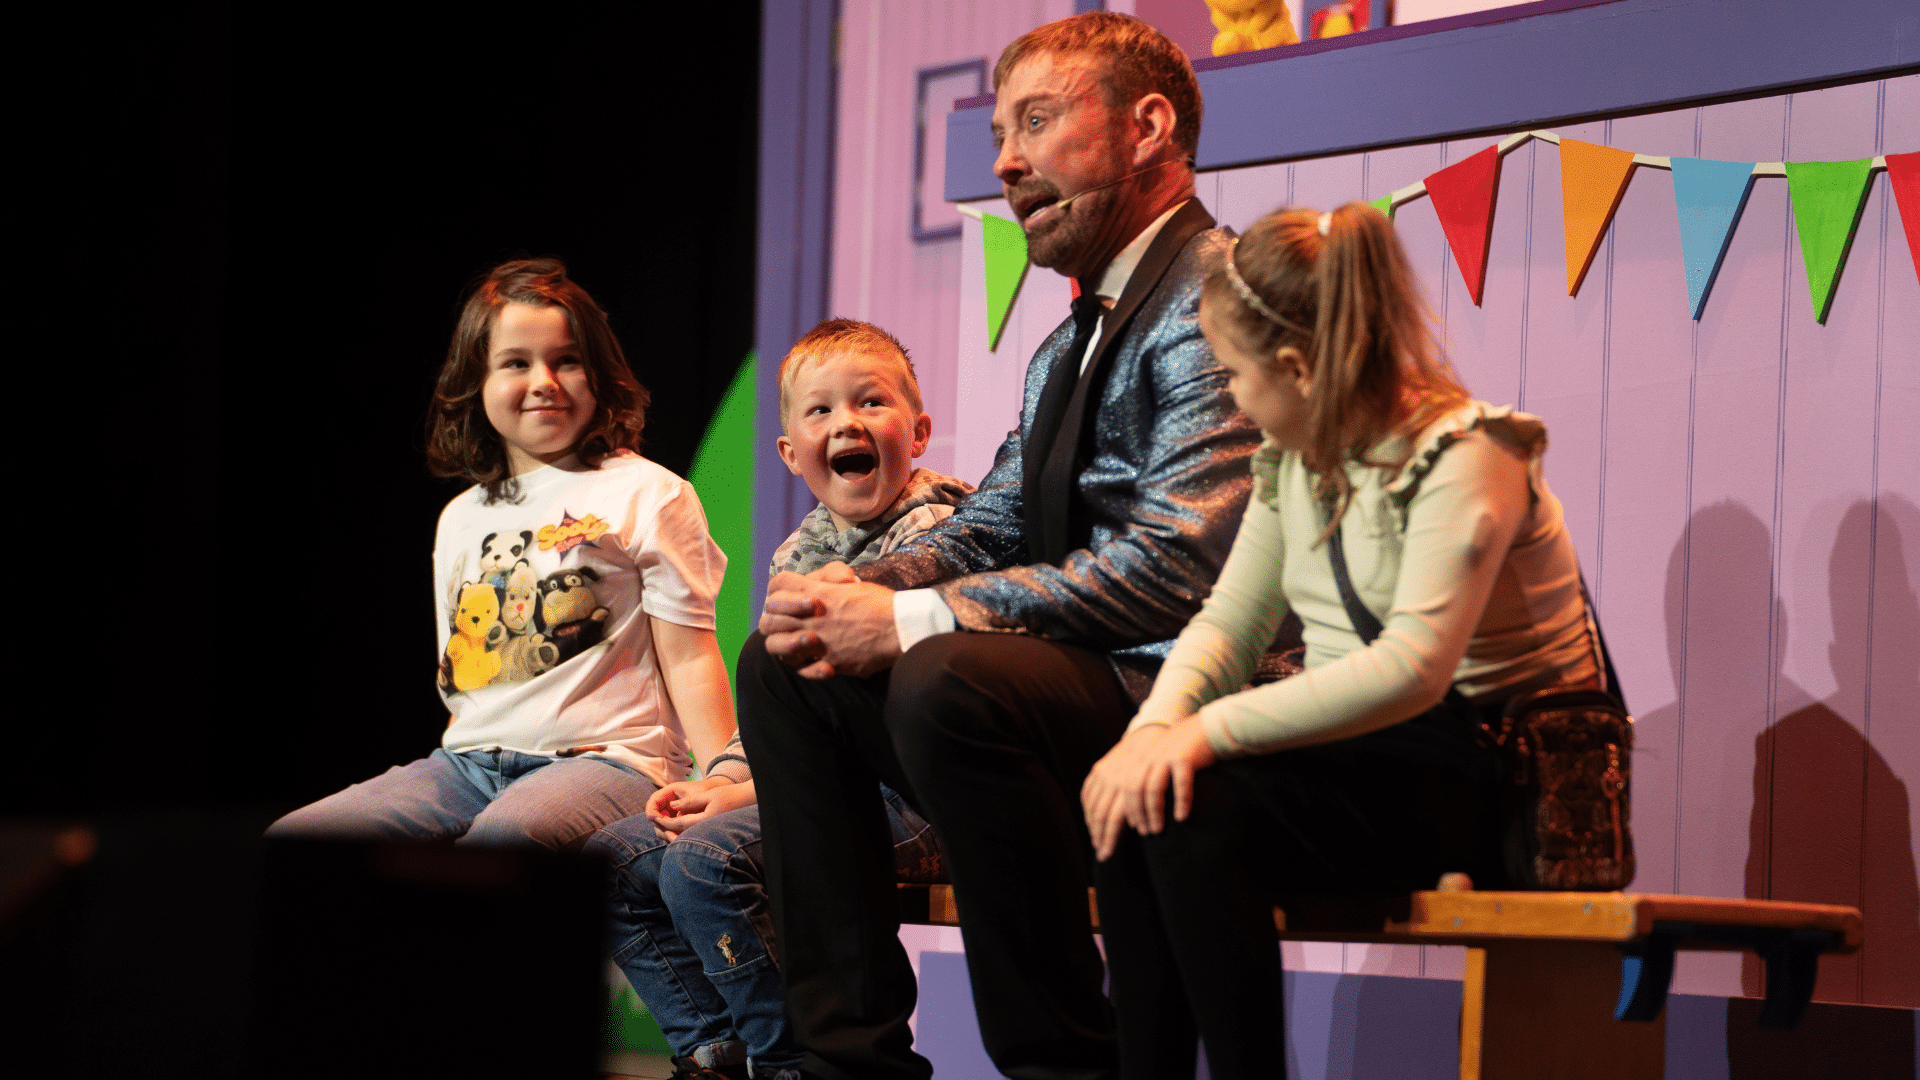 The Sooty Show production image: a man in a sparkly blue dinner jacket sits on a bench with three smiling children; behind them is a lilac wooden wall with colourful bunting.